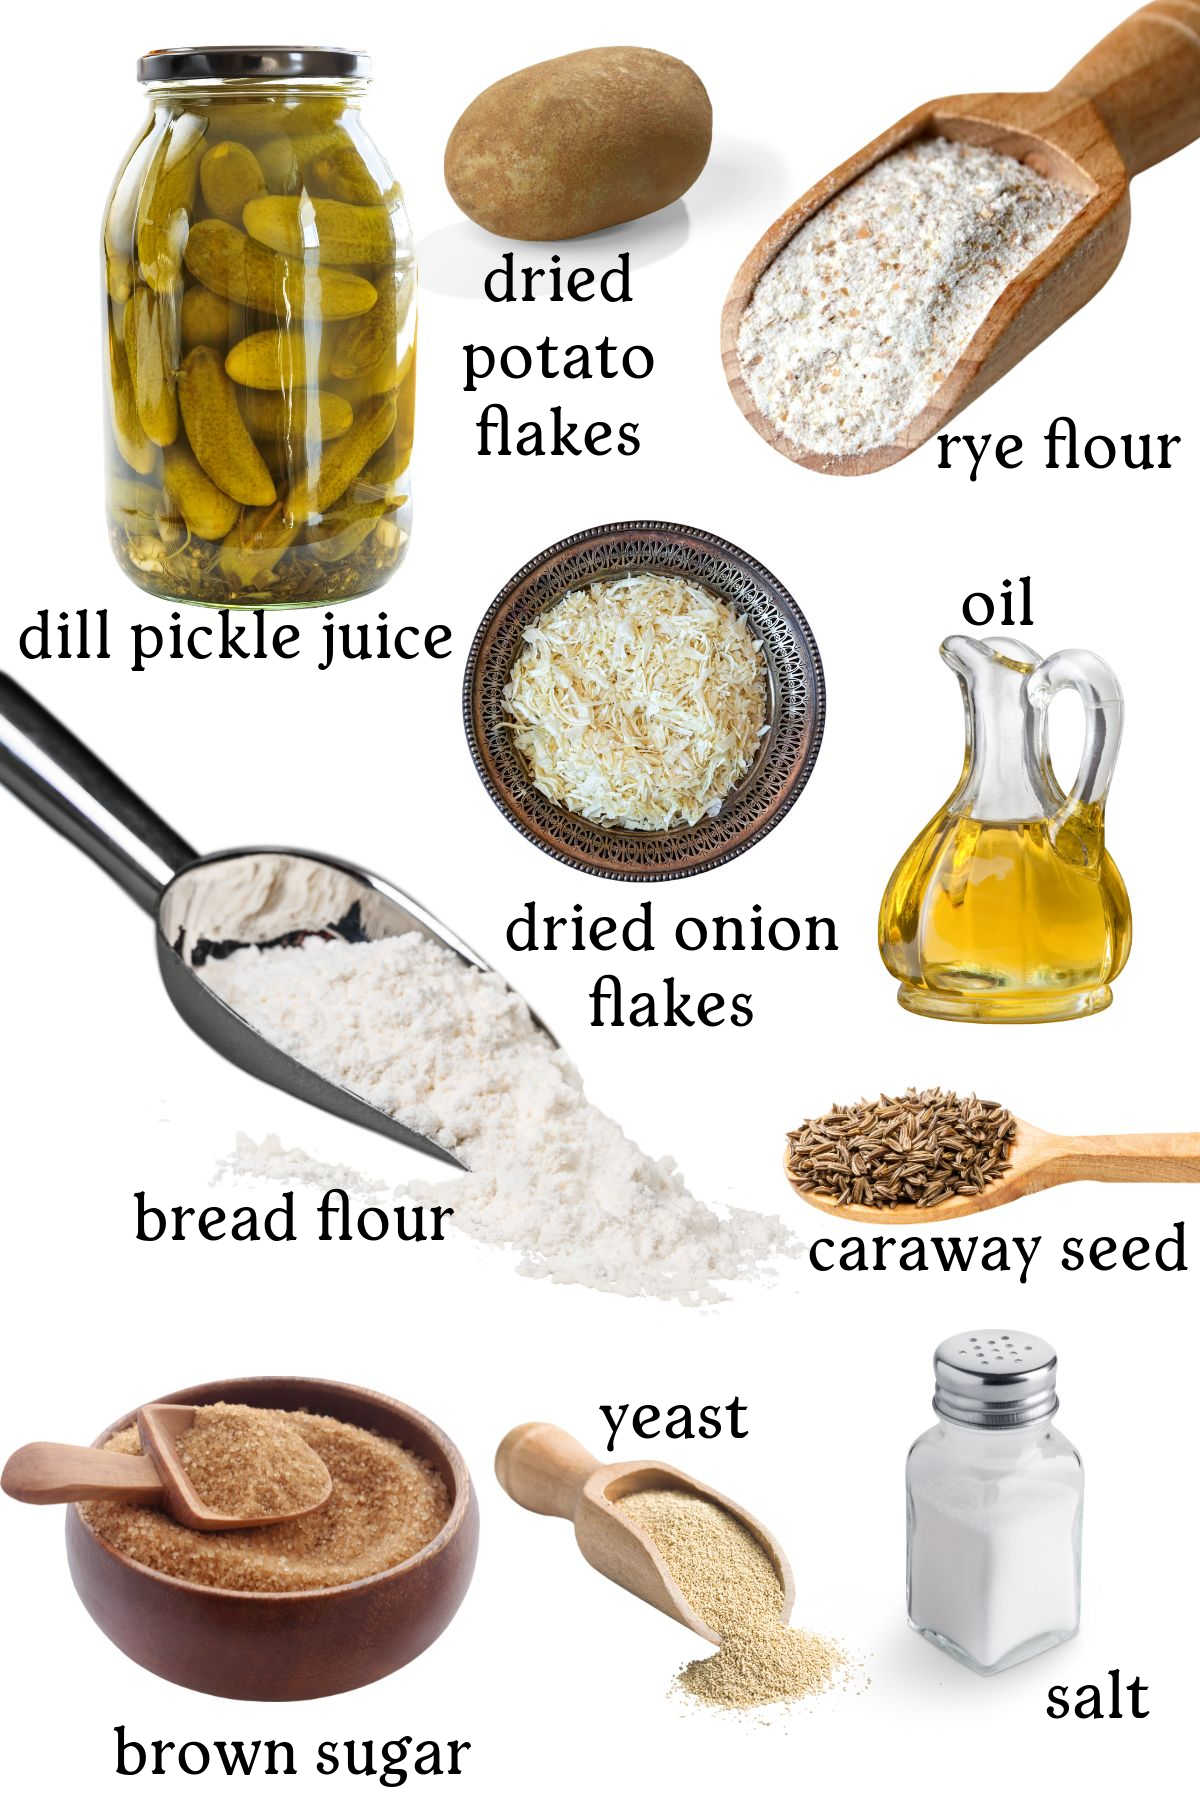 Labeled ingredients for this Jewish rye bread recipe.